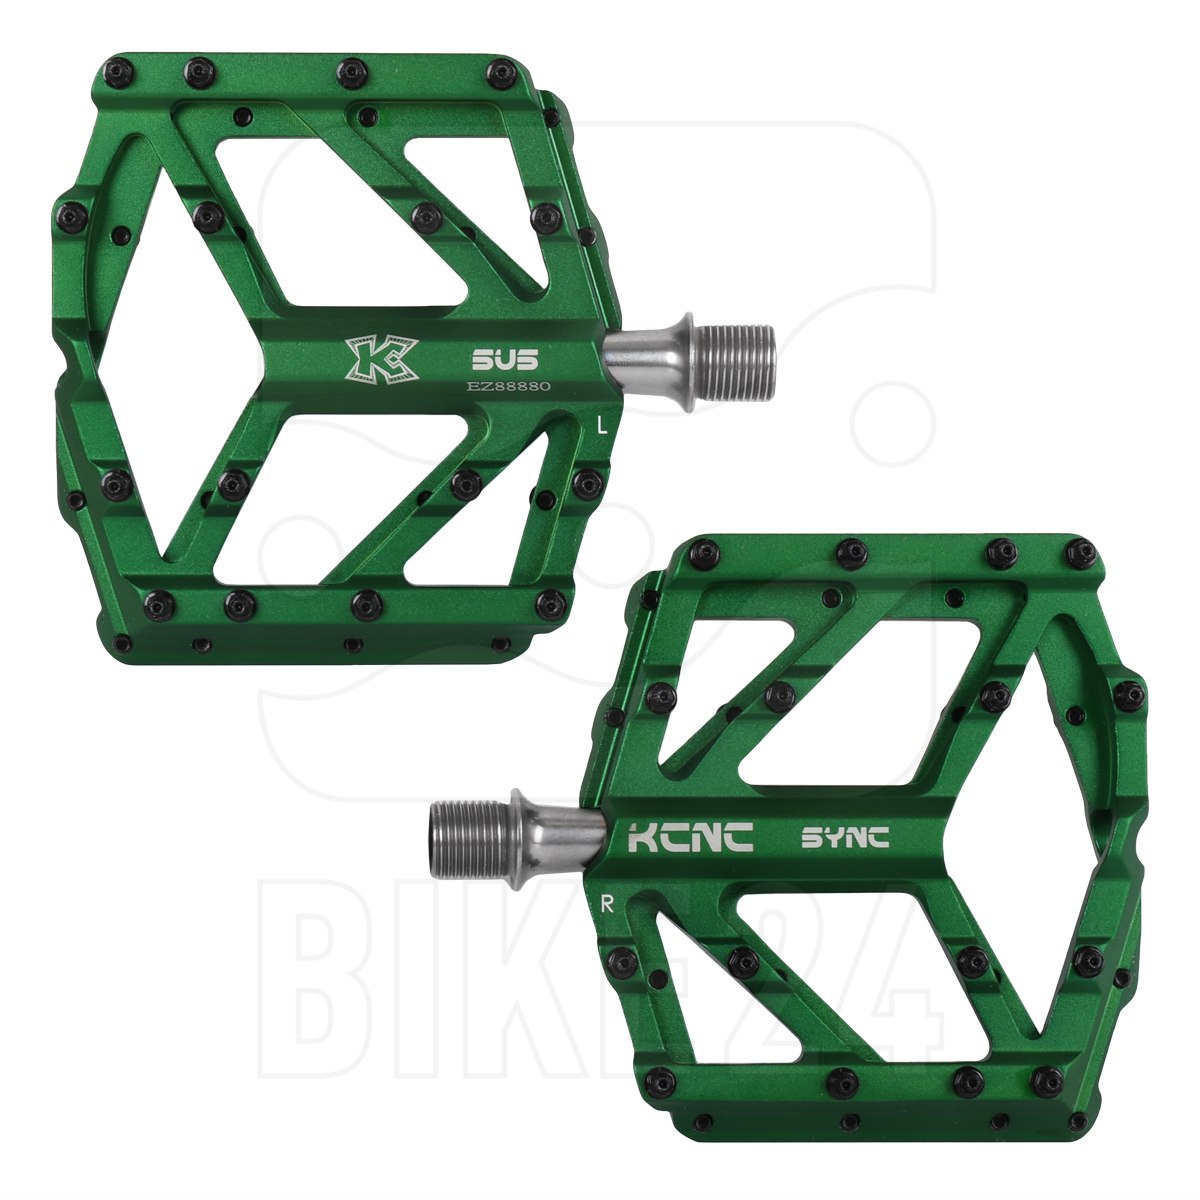 Picture of KCNC SYNC Platform Pedals - green